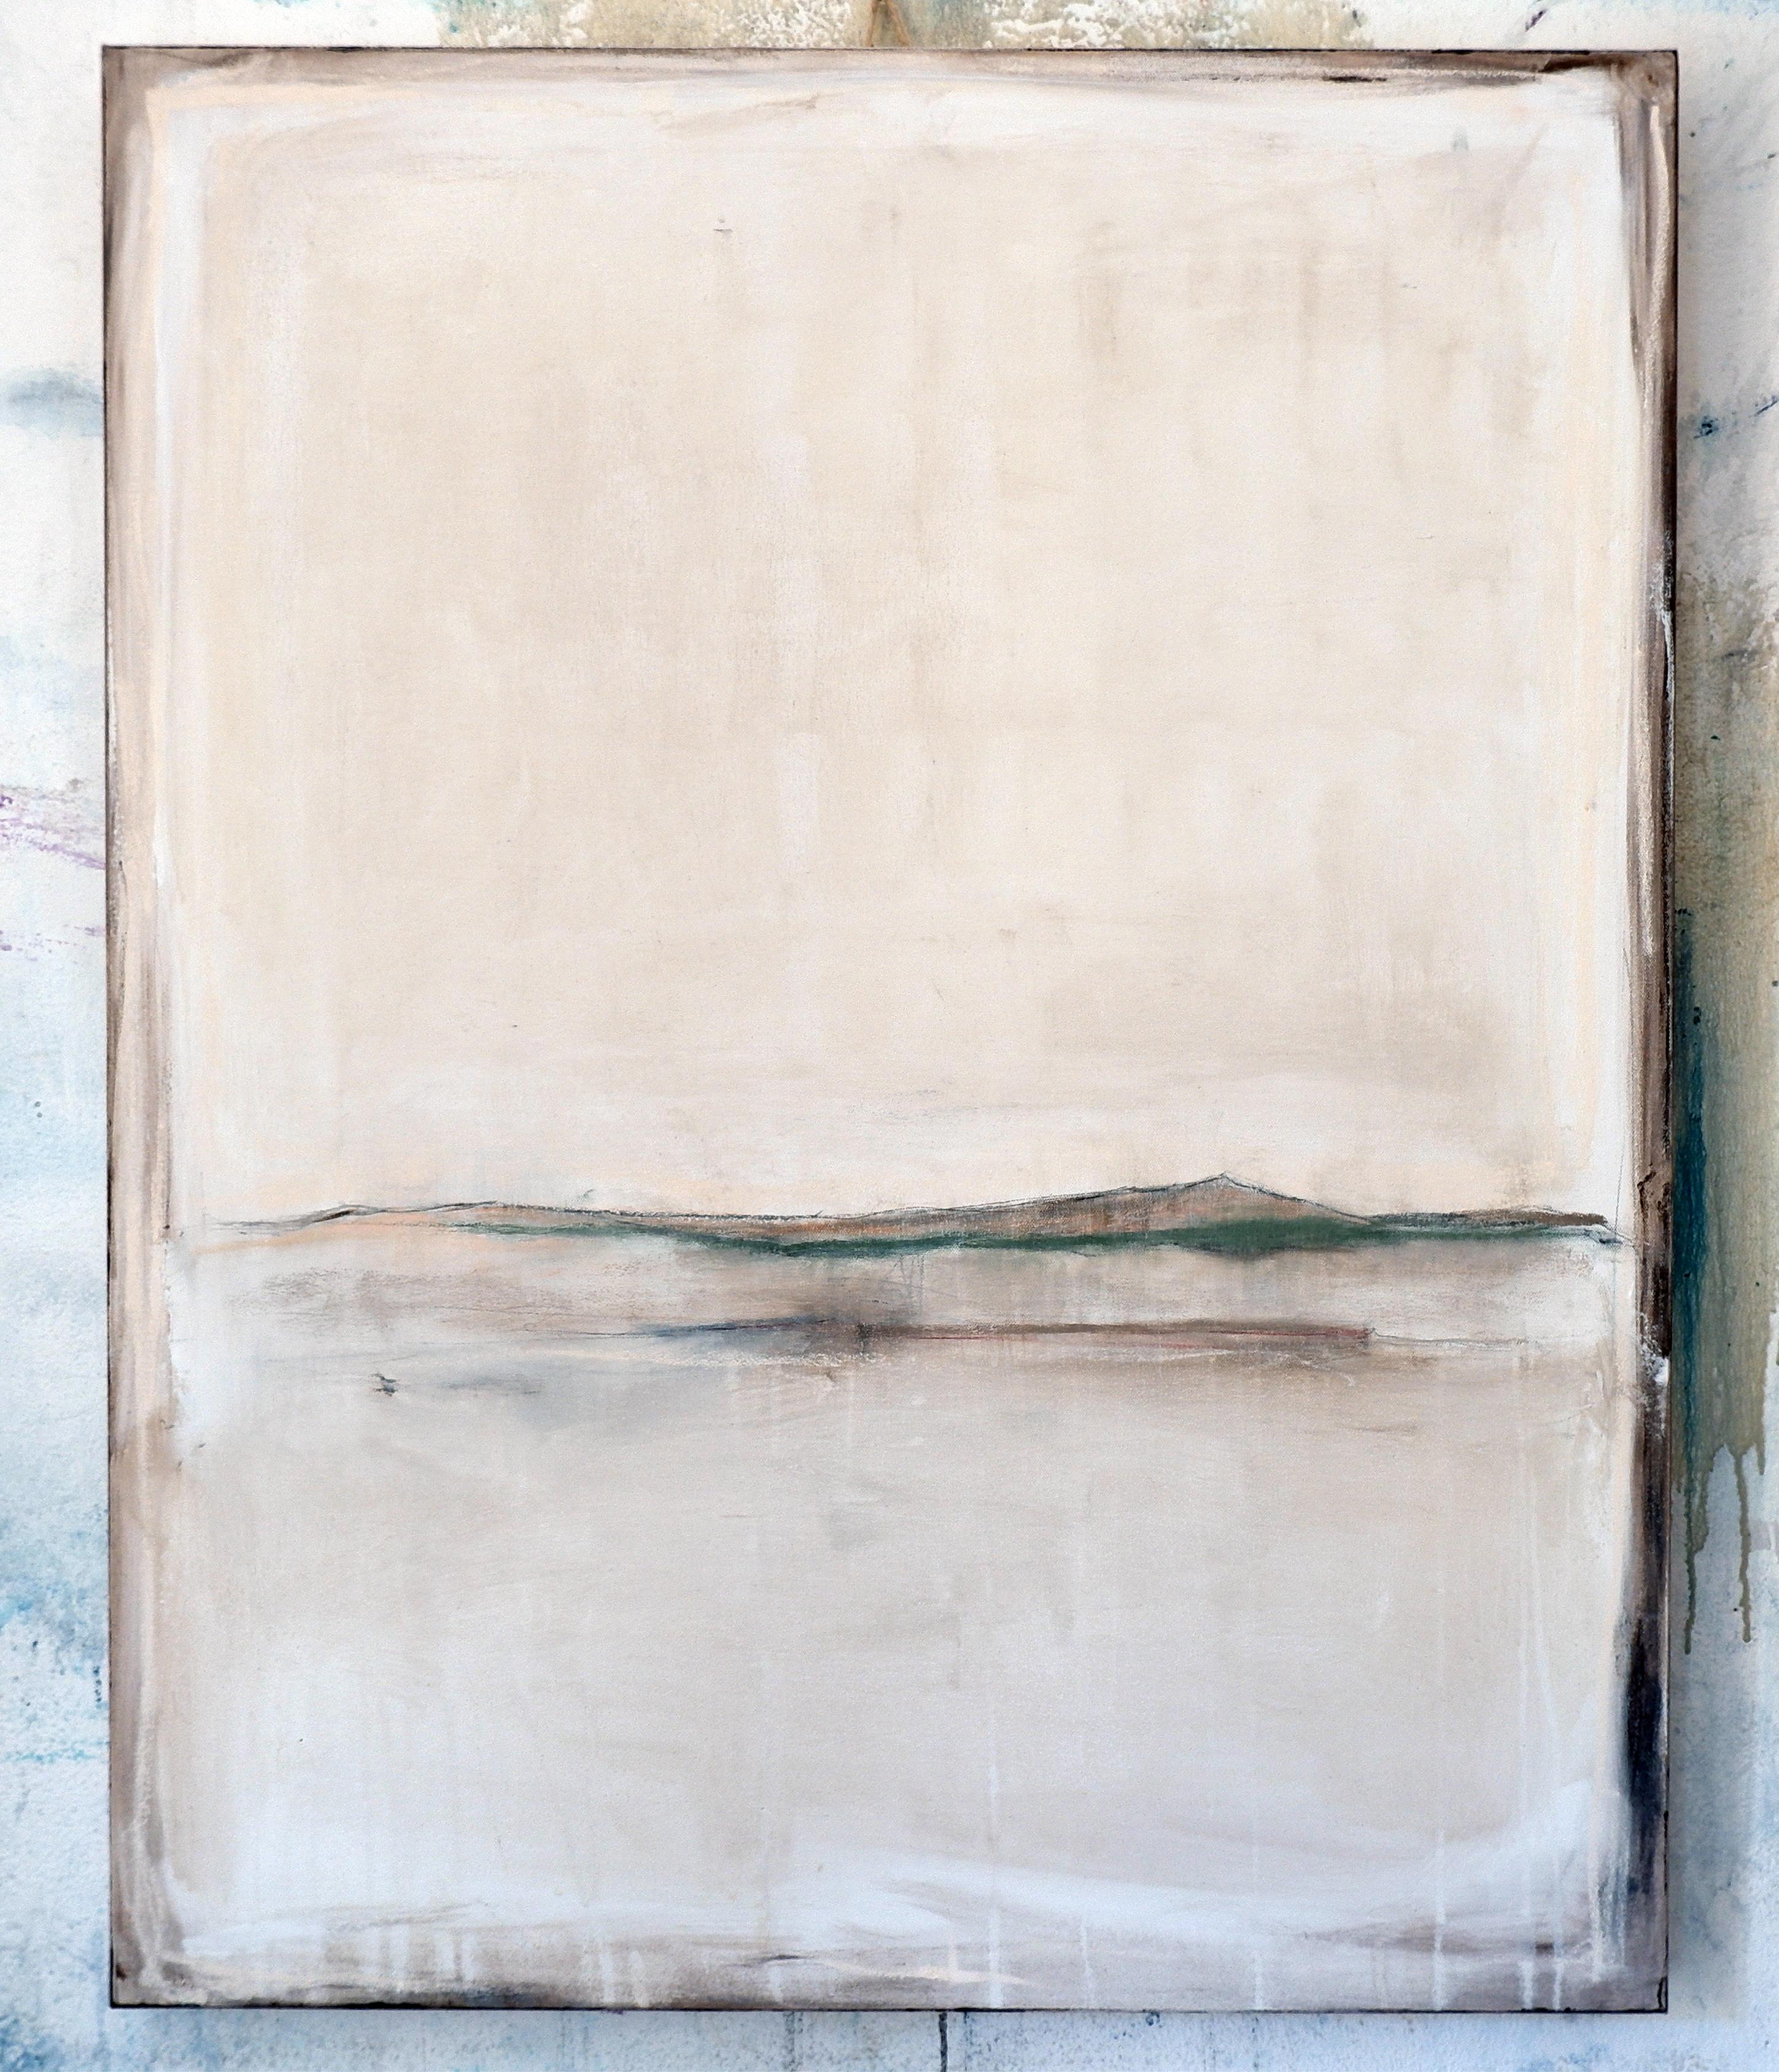 Landscape 101, Contemporary Mixed media Abstract Minimalist White Monochrome - Painting by Marilina Marchica